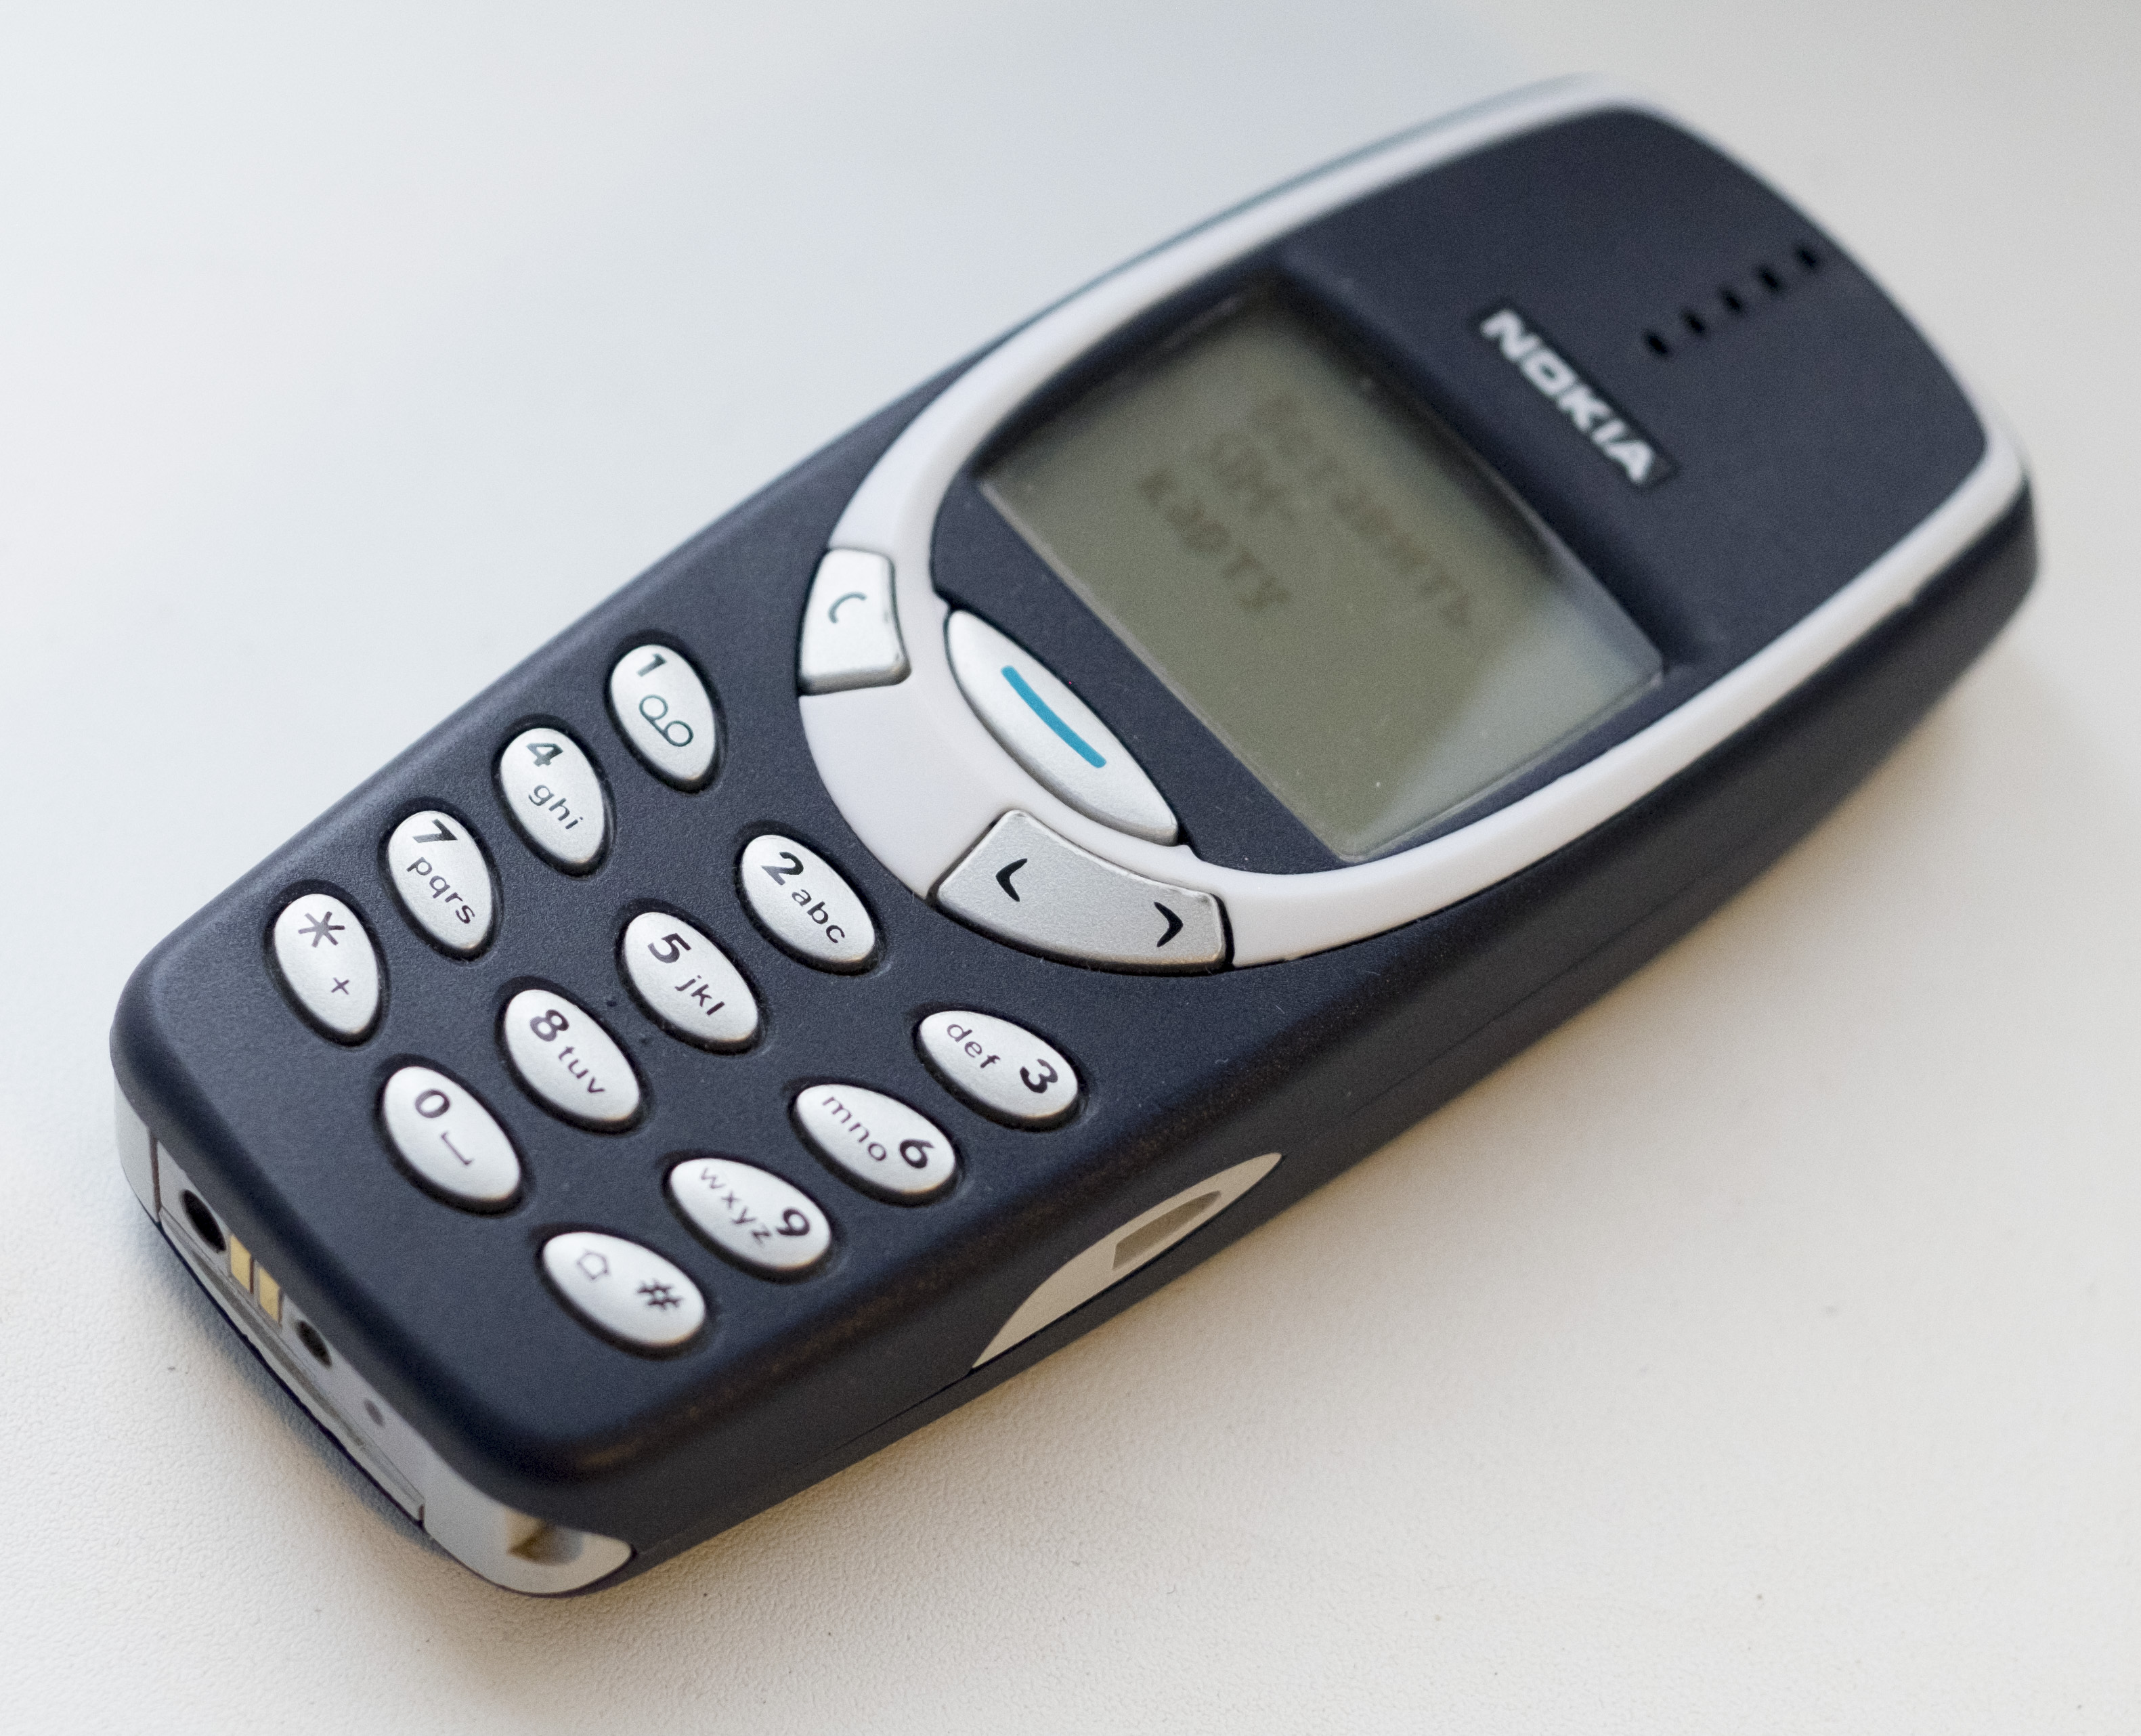 In September 2000, Nokia introduced the 3310 - a phone that would later become their best known ...